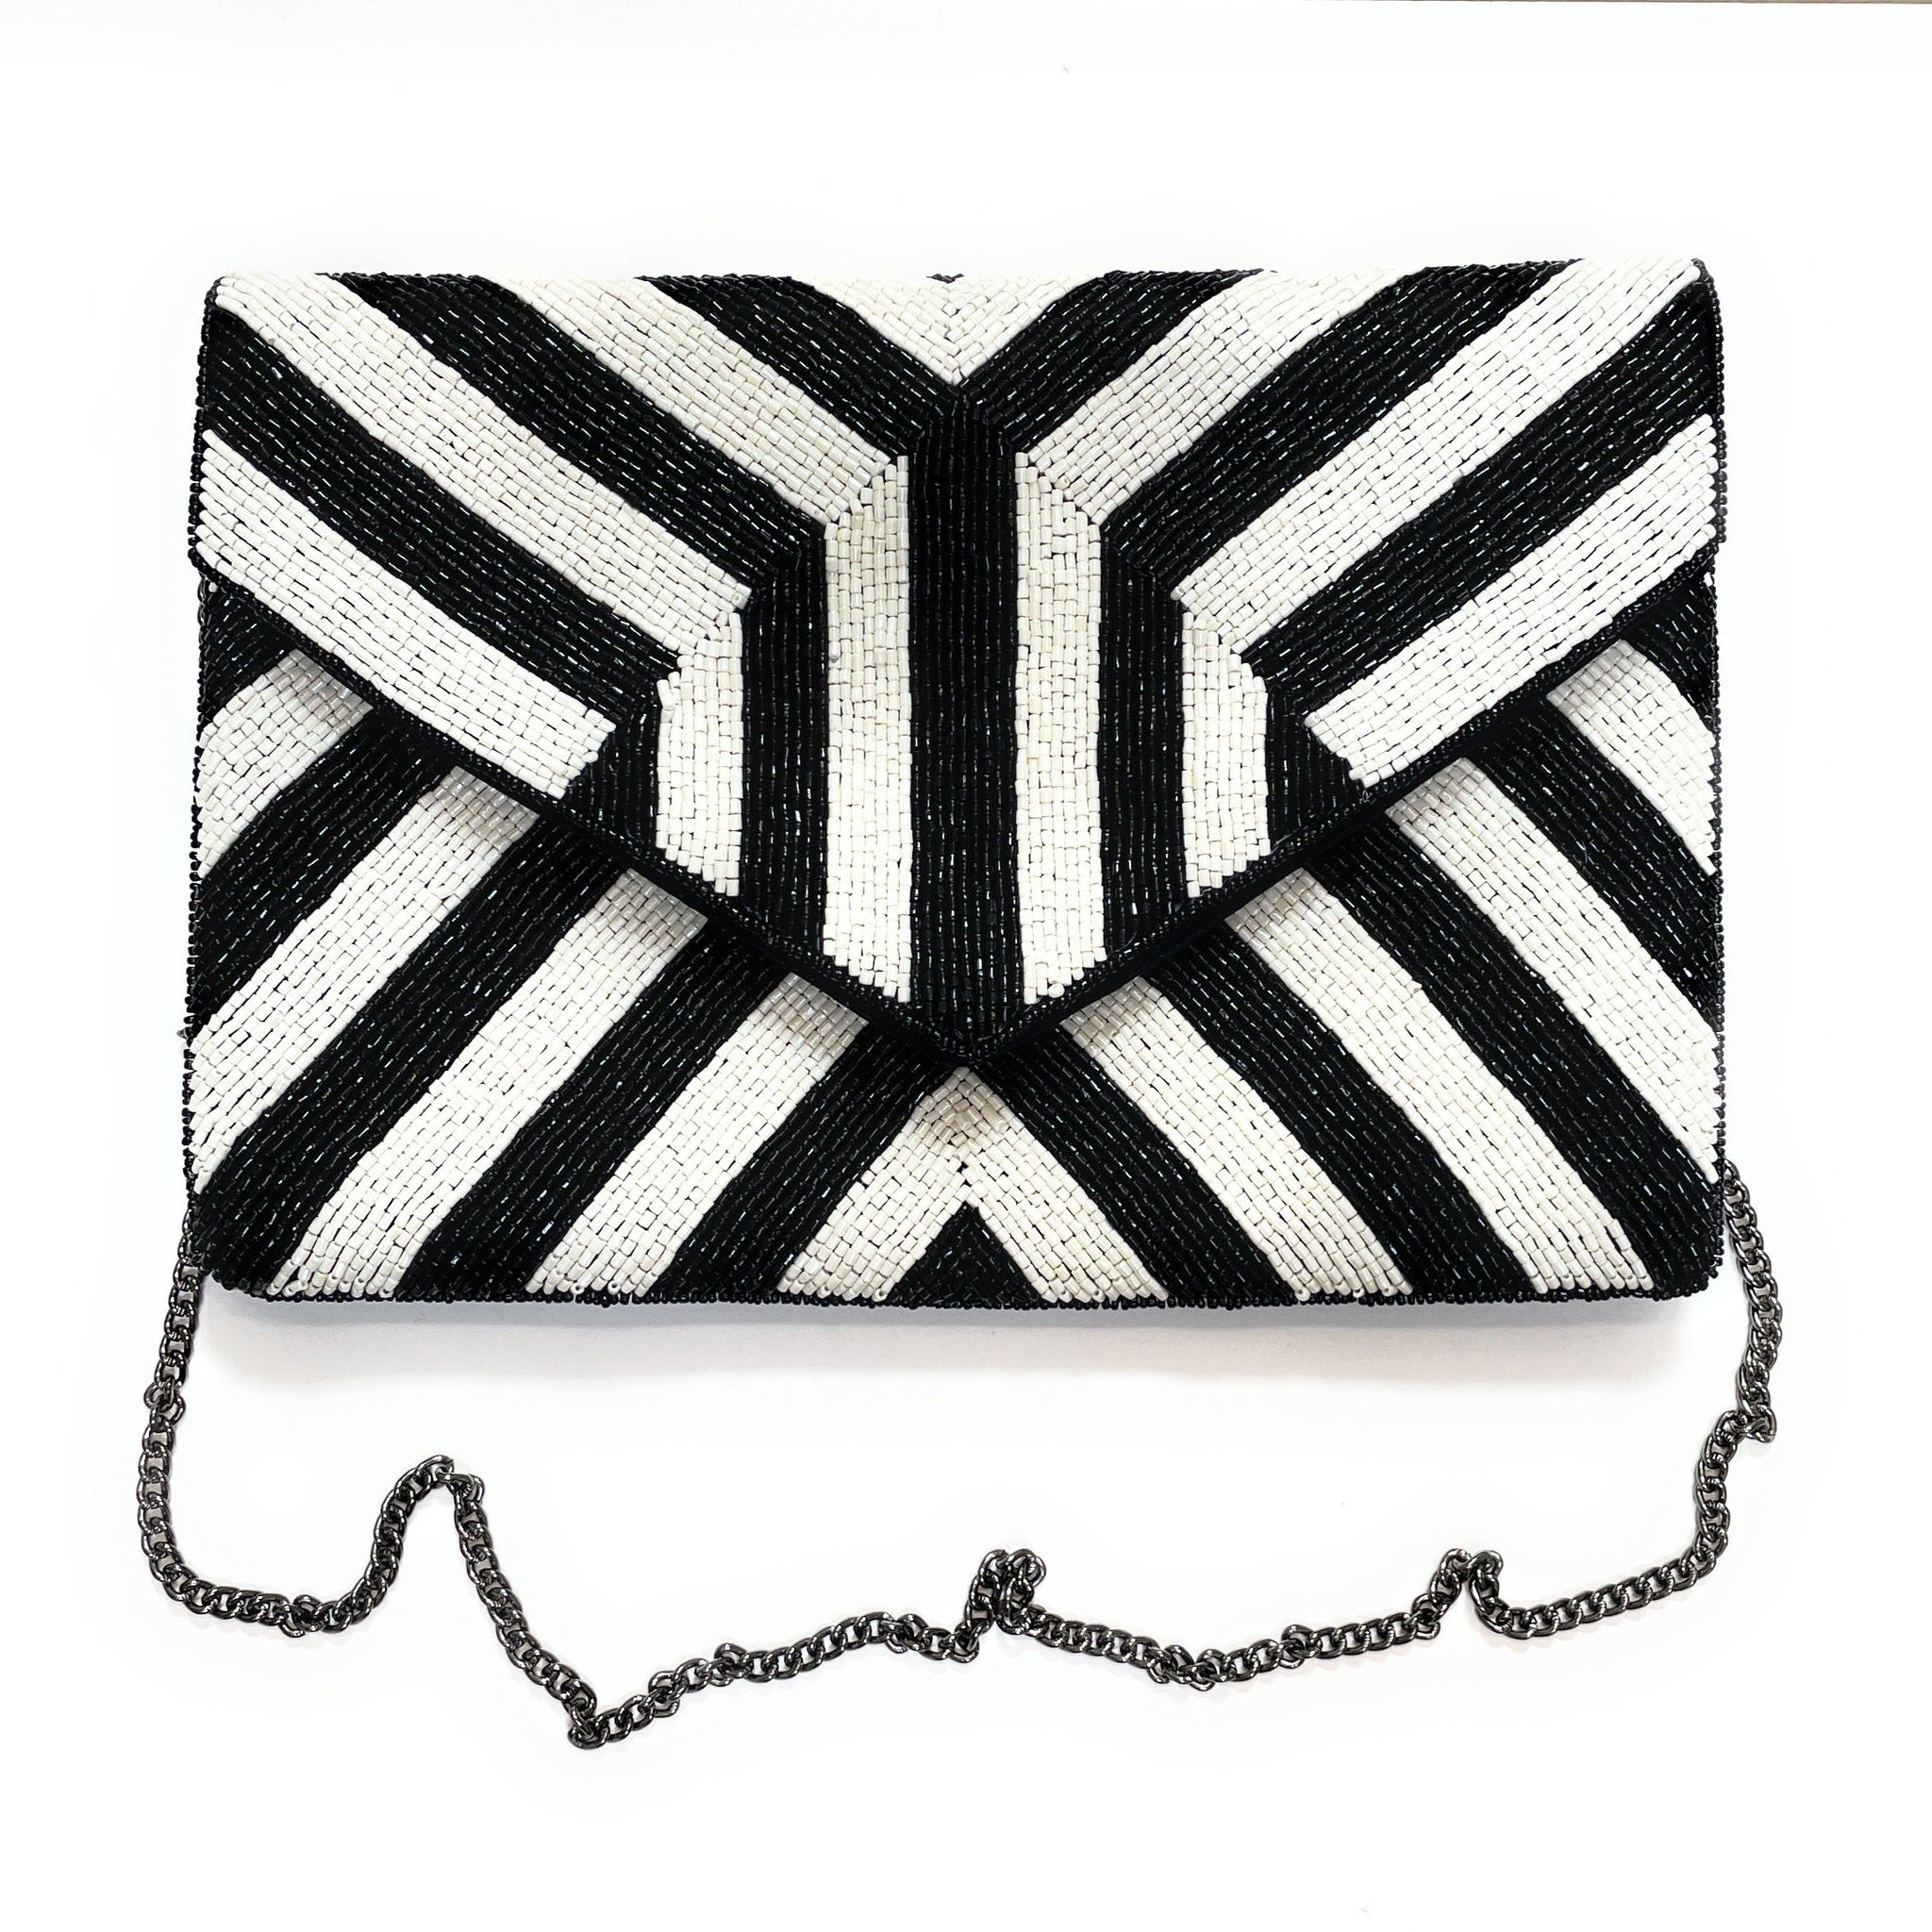 White Leather-Look Envelope Clutch Bag | New Look